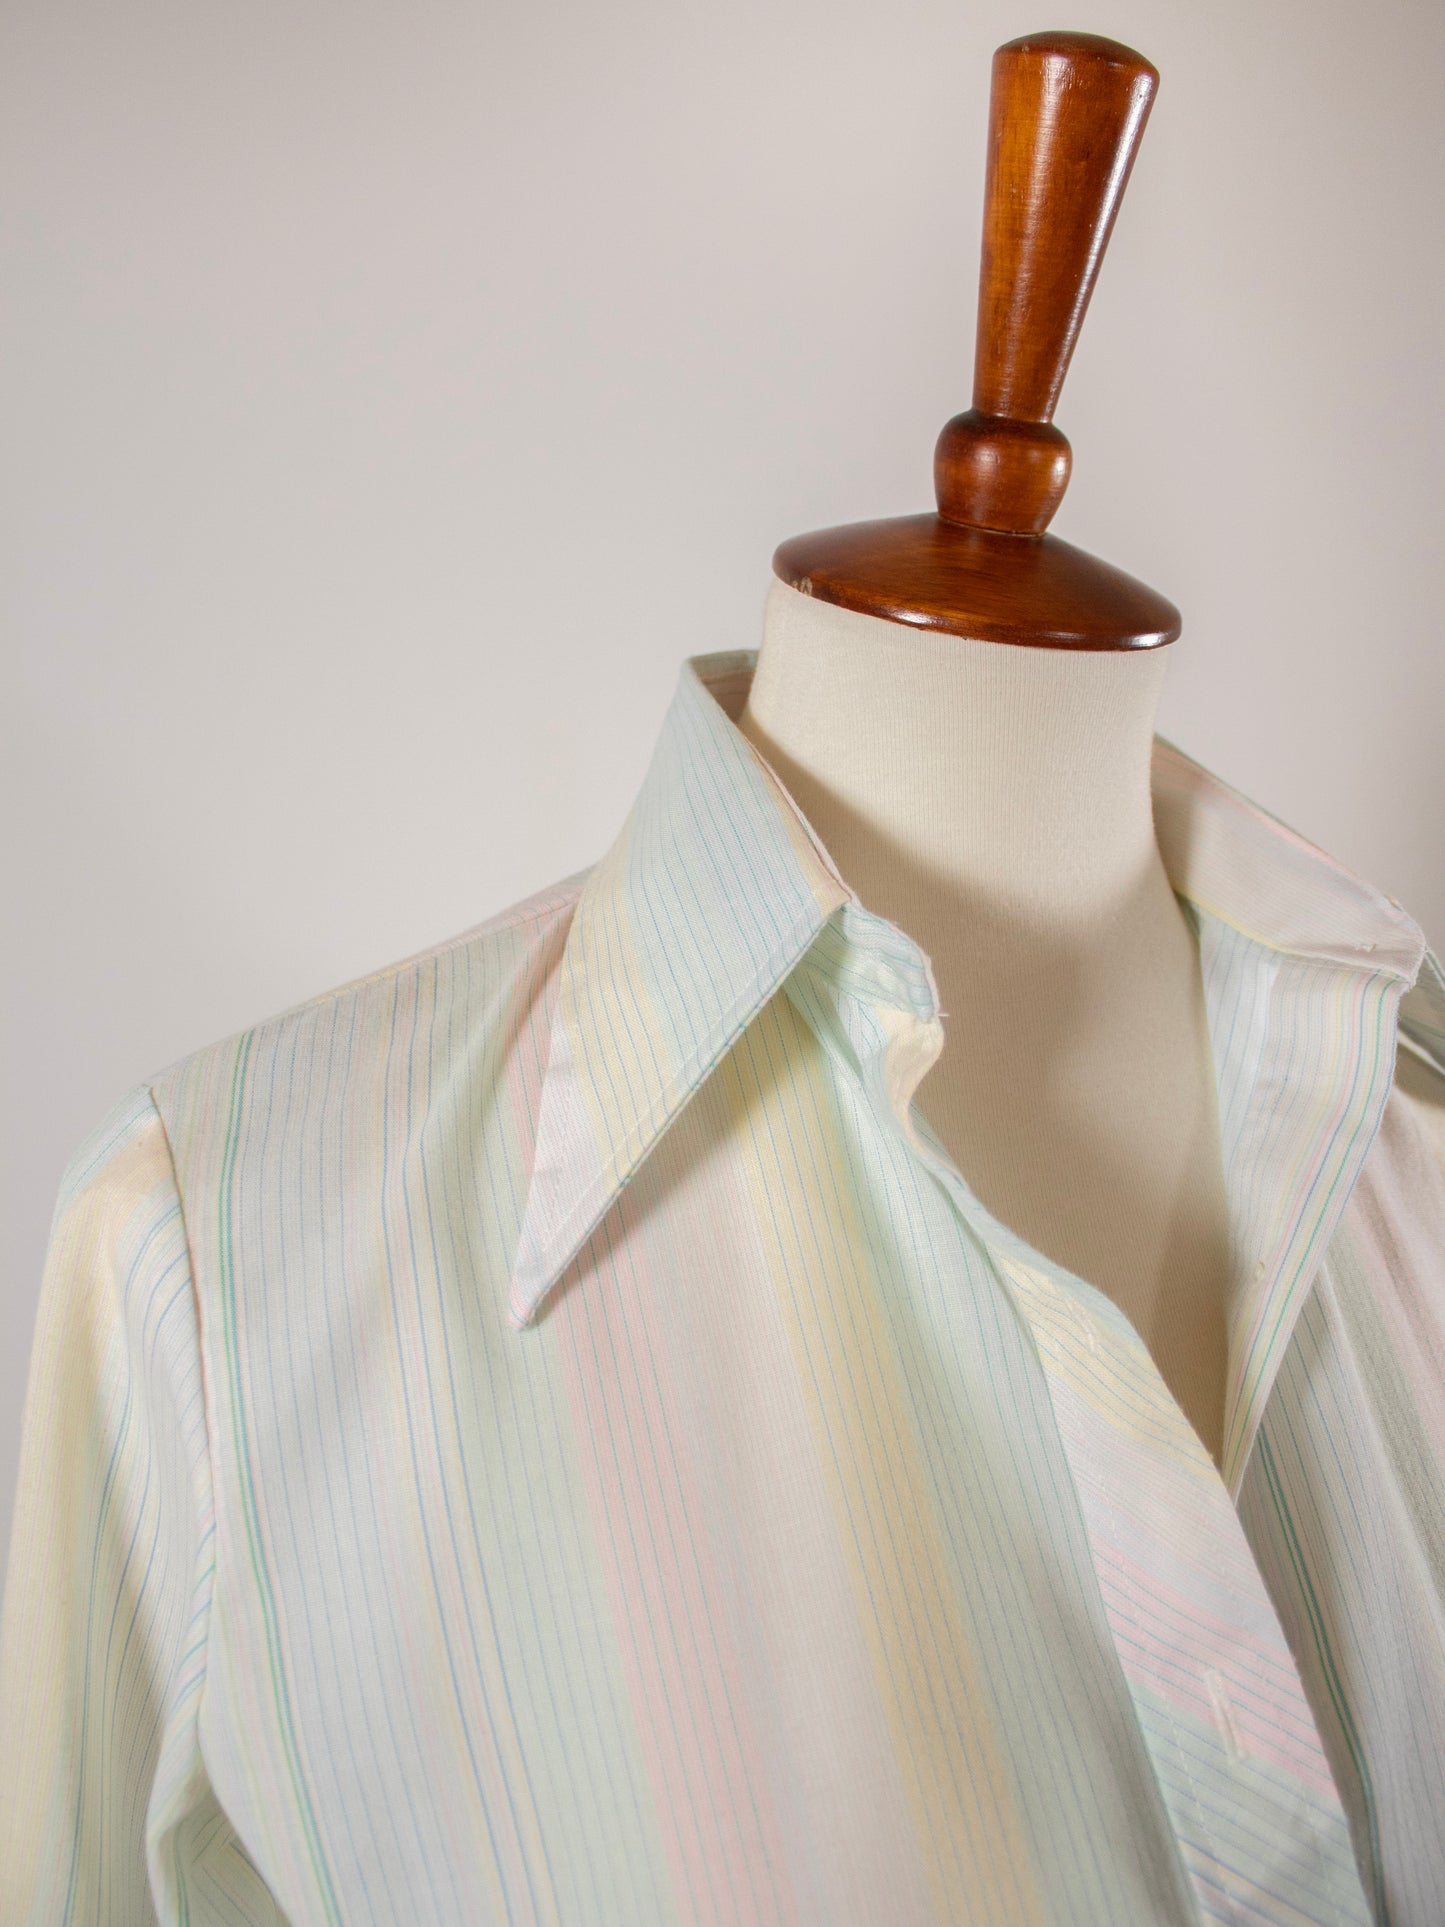 1970s Pastel Stripped Button Up